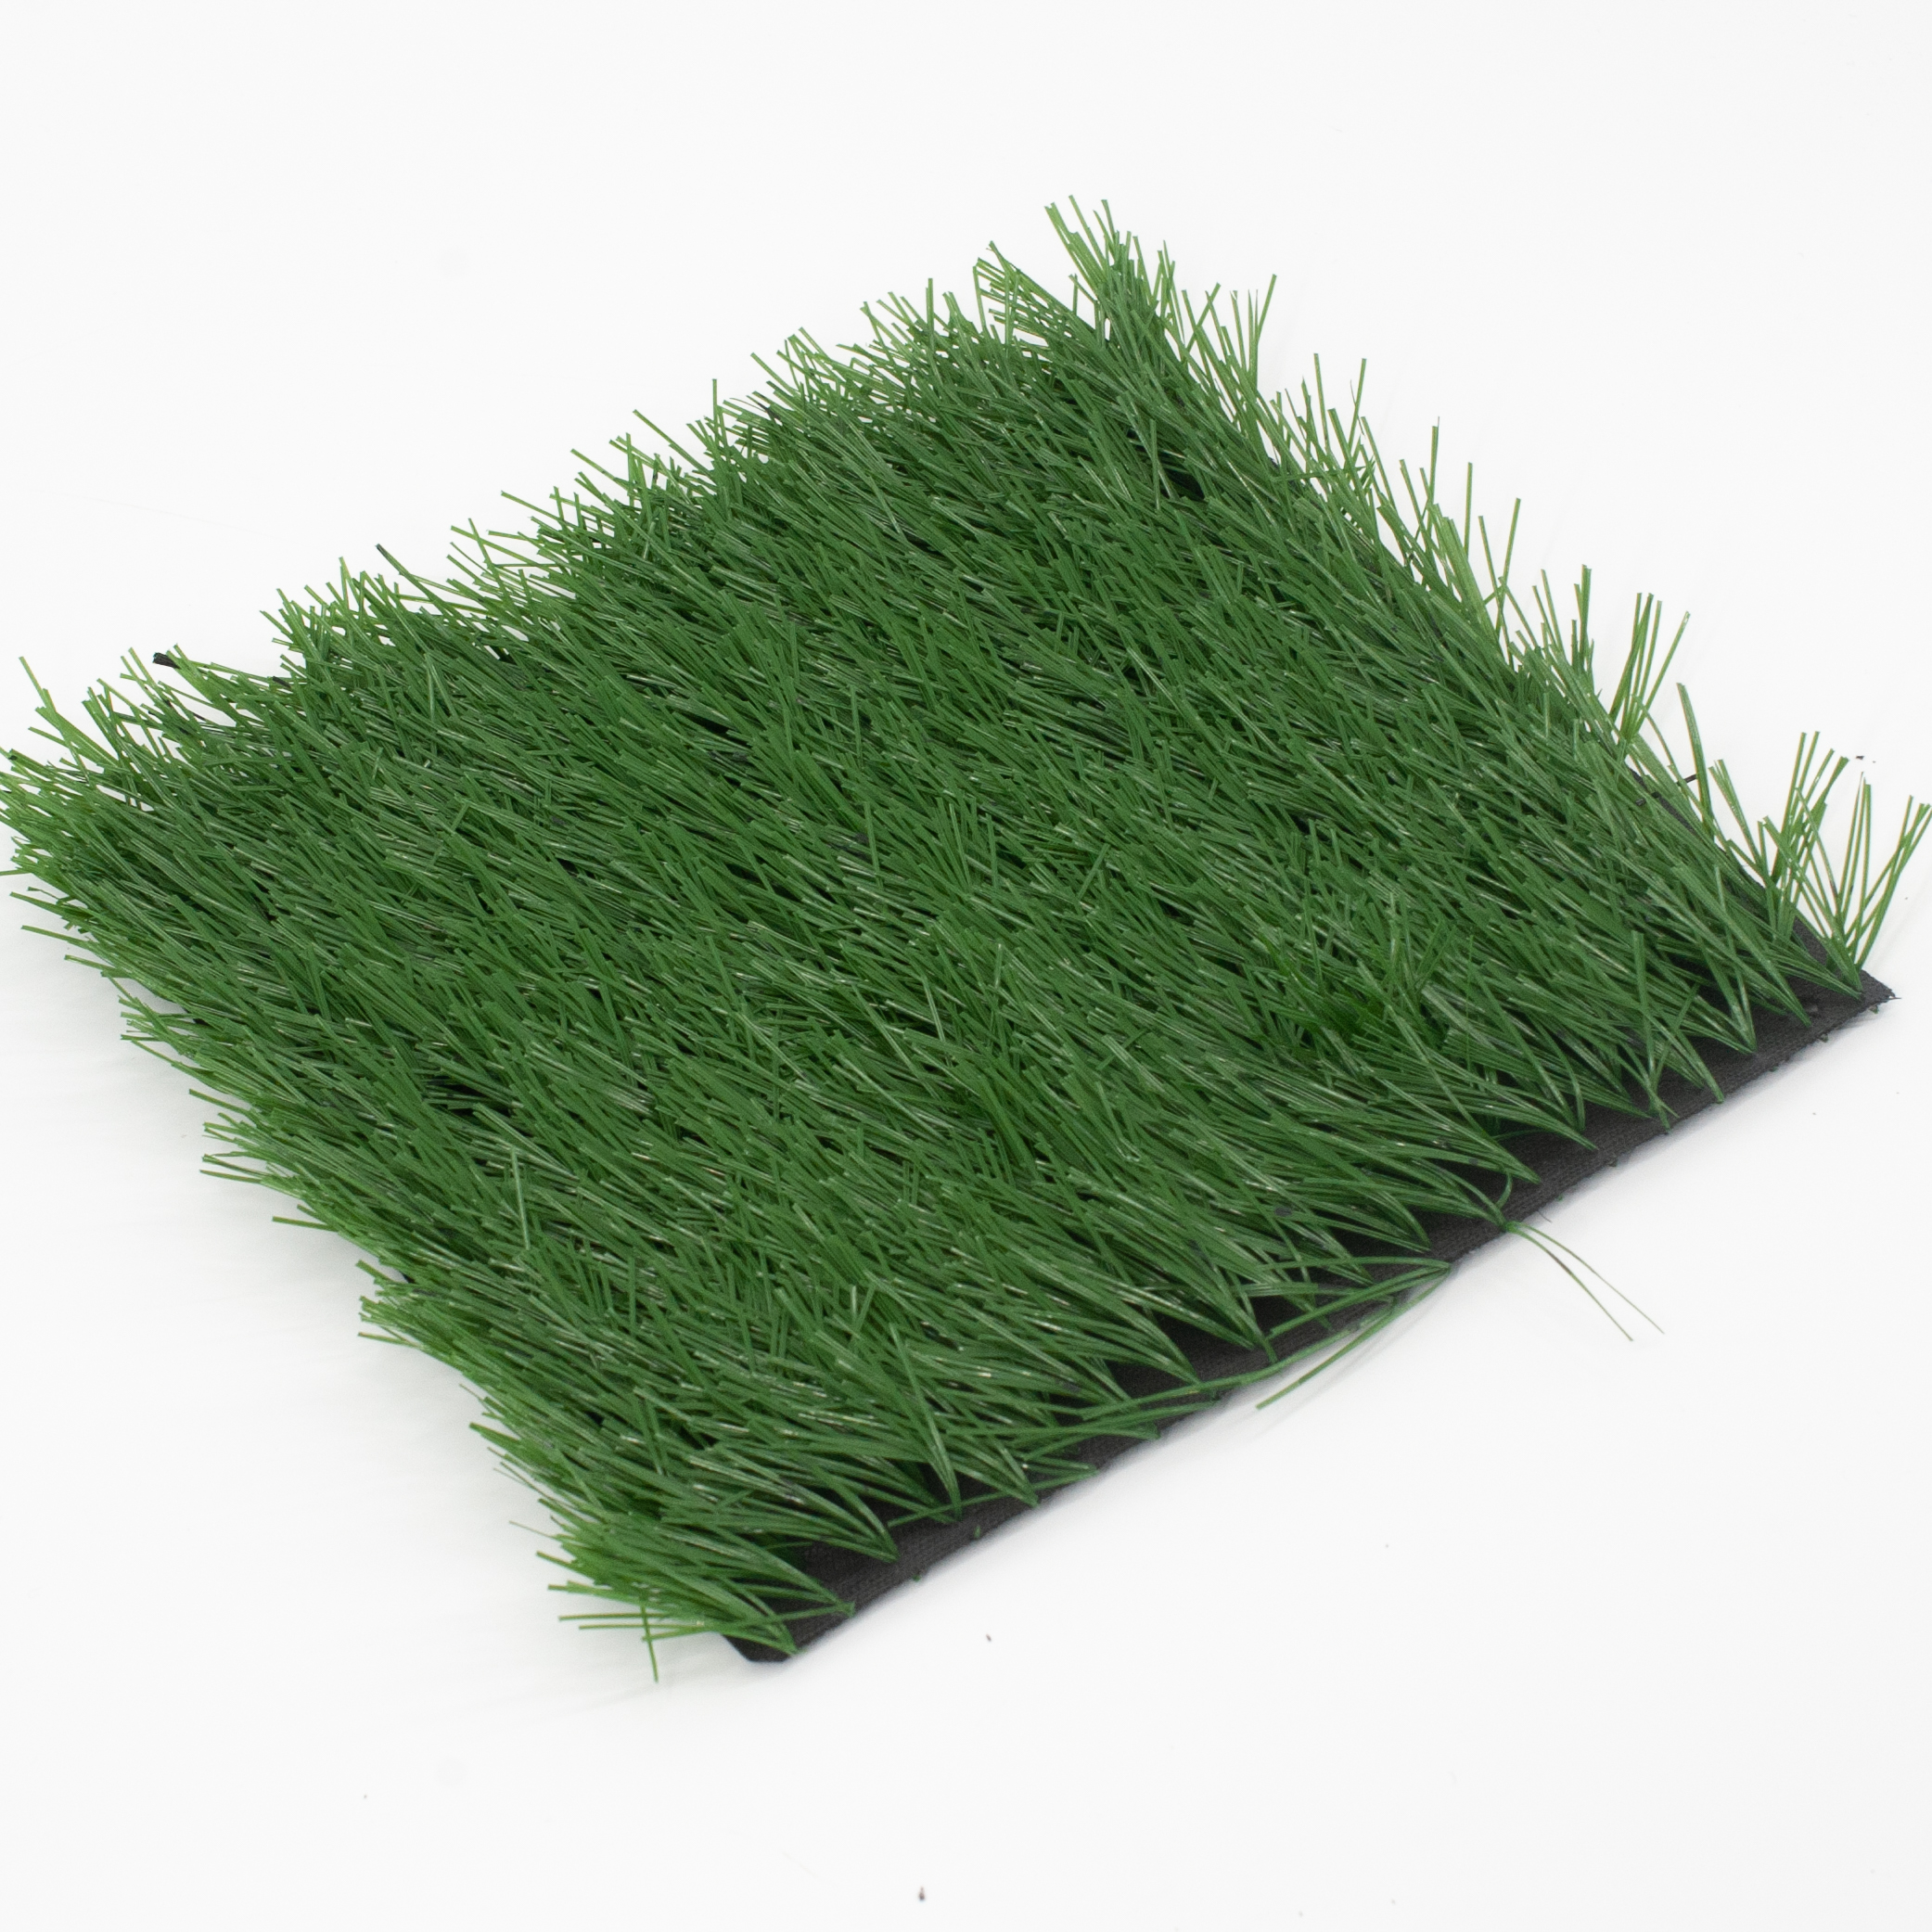 30mm Quality Artificial Turf for Soccer Field